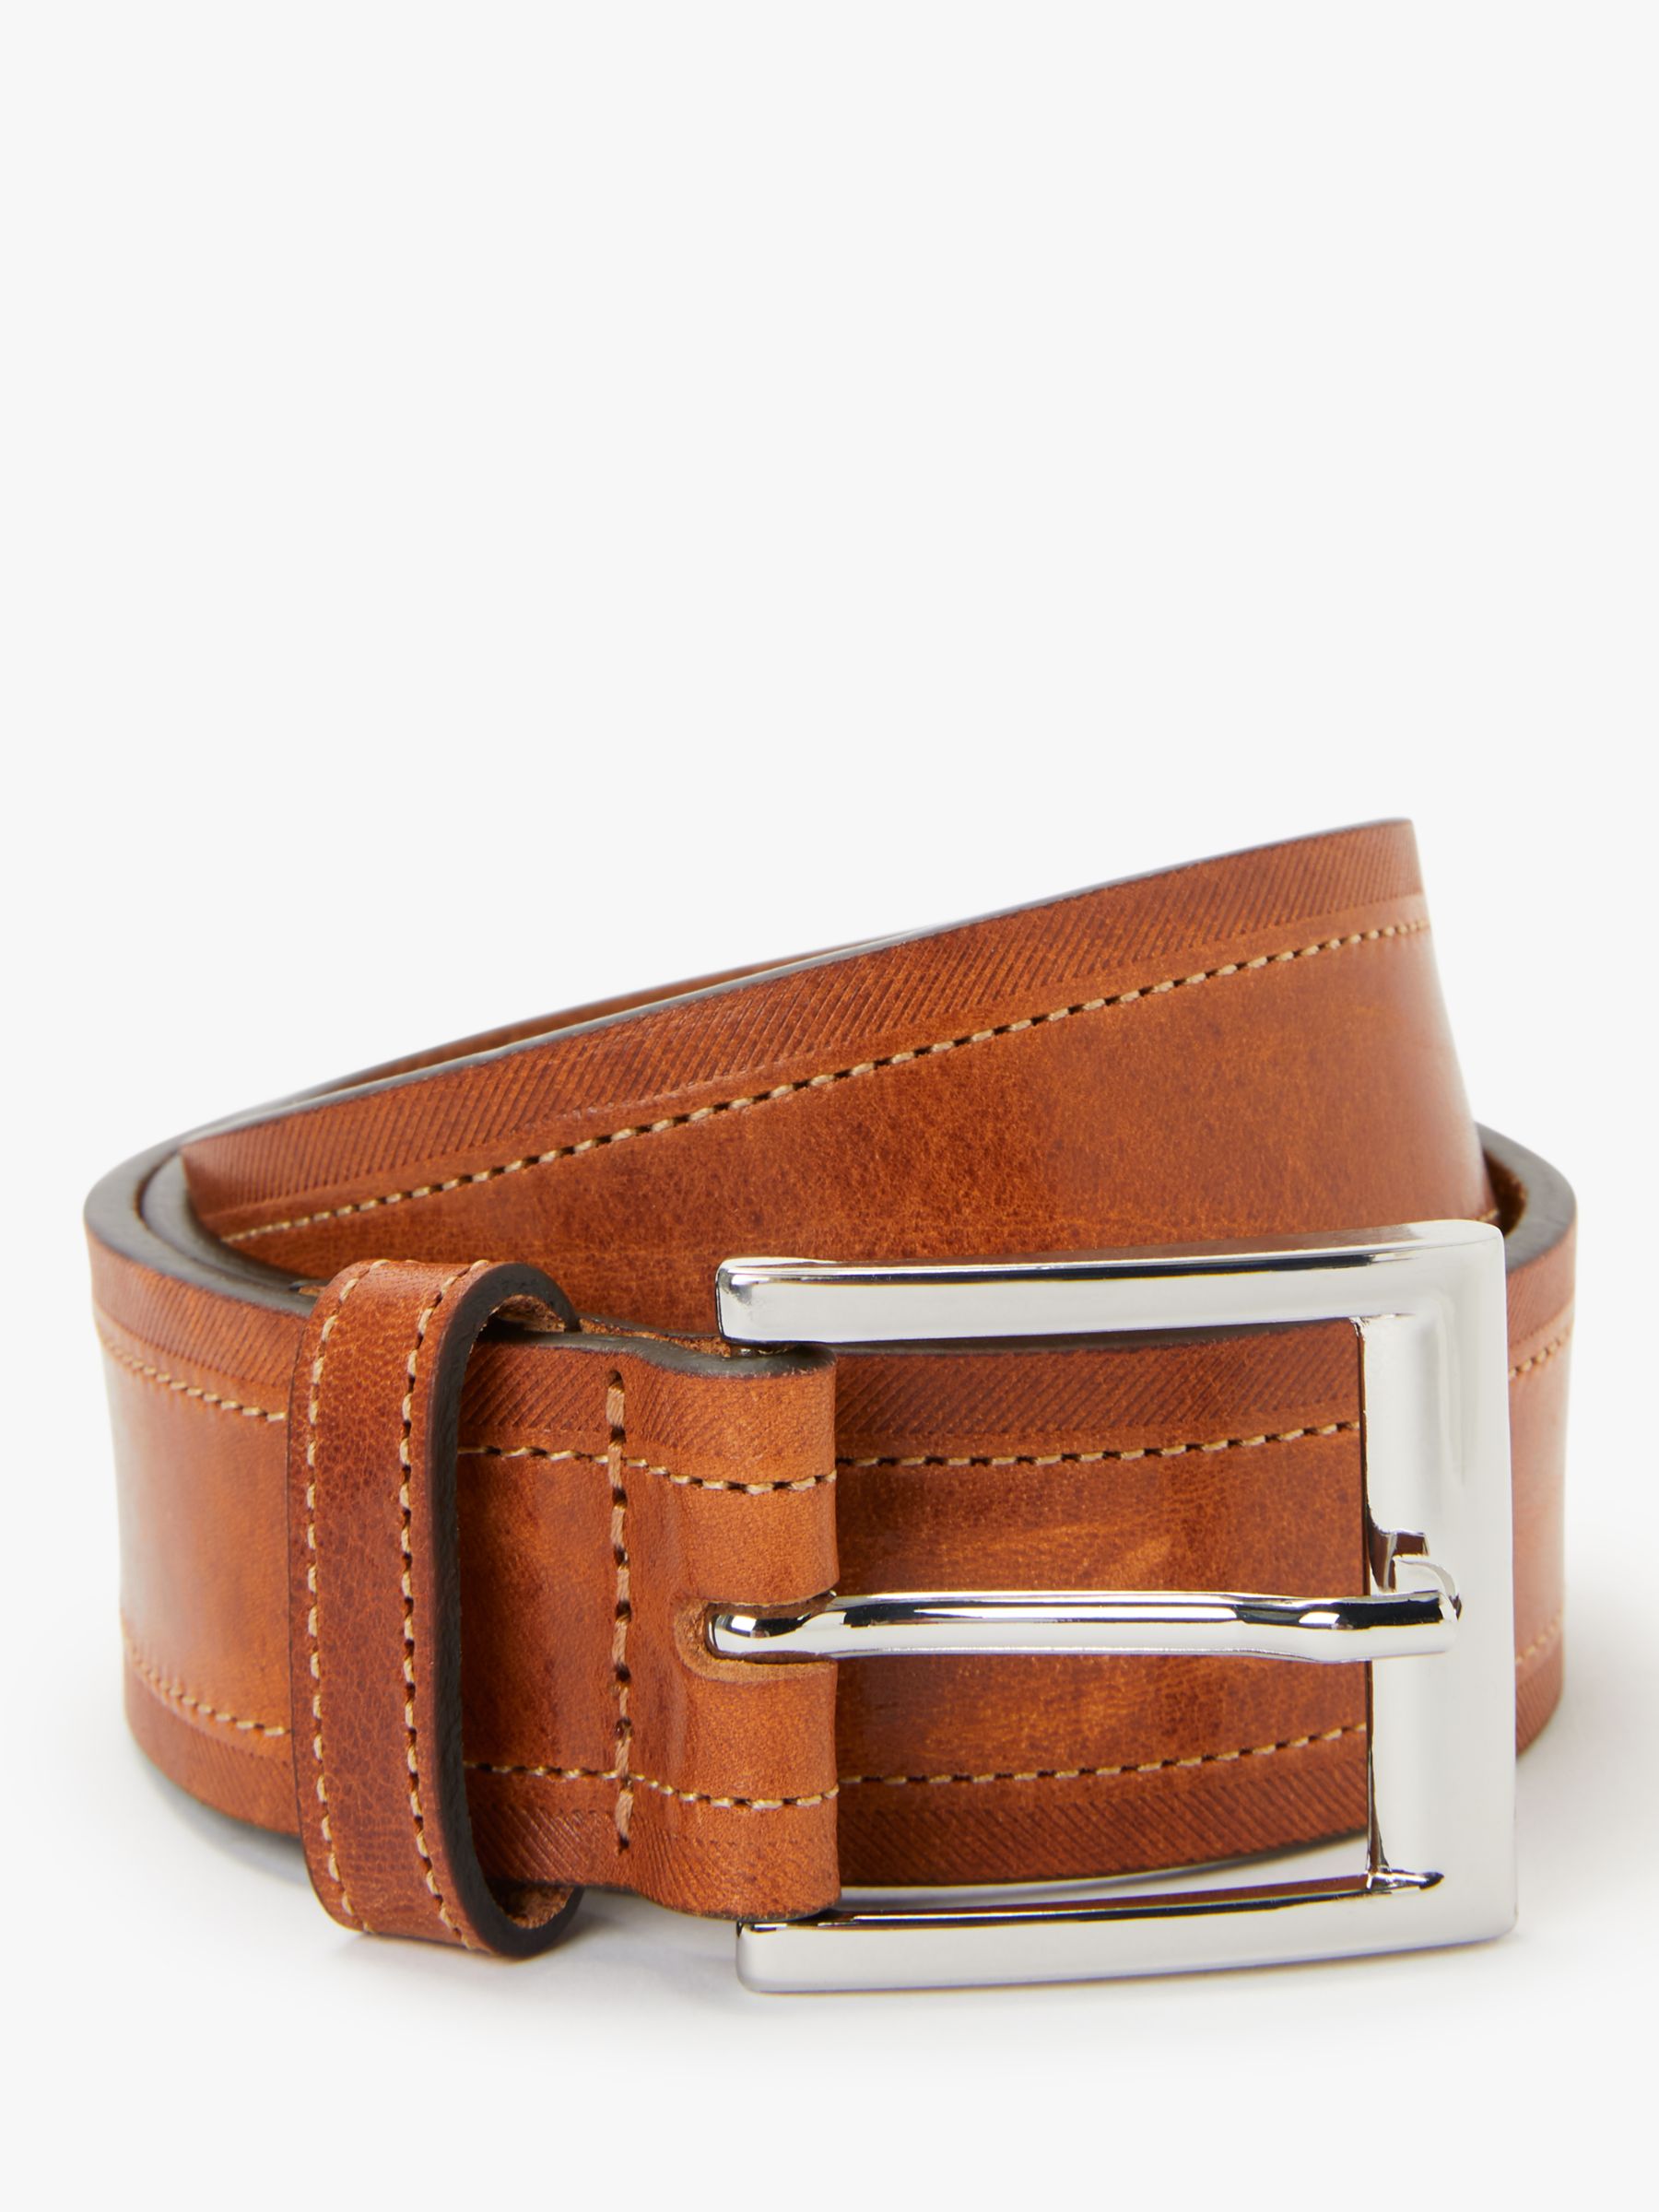 John Lewis Made in Italy Leather Chino Belt, Brown, S